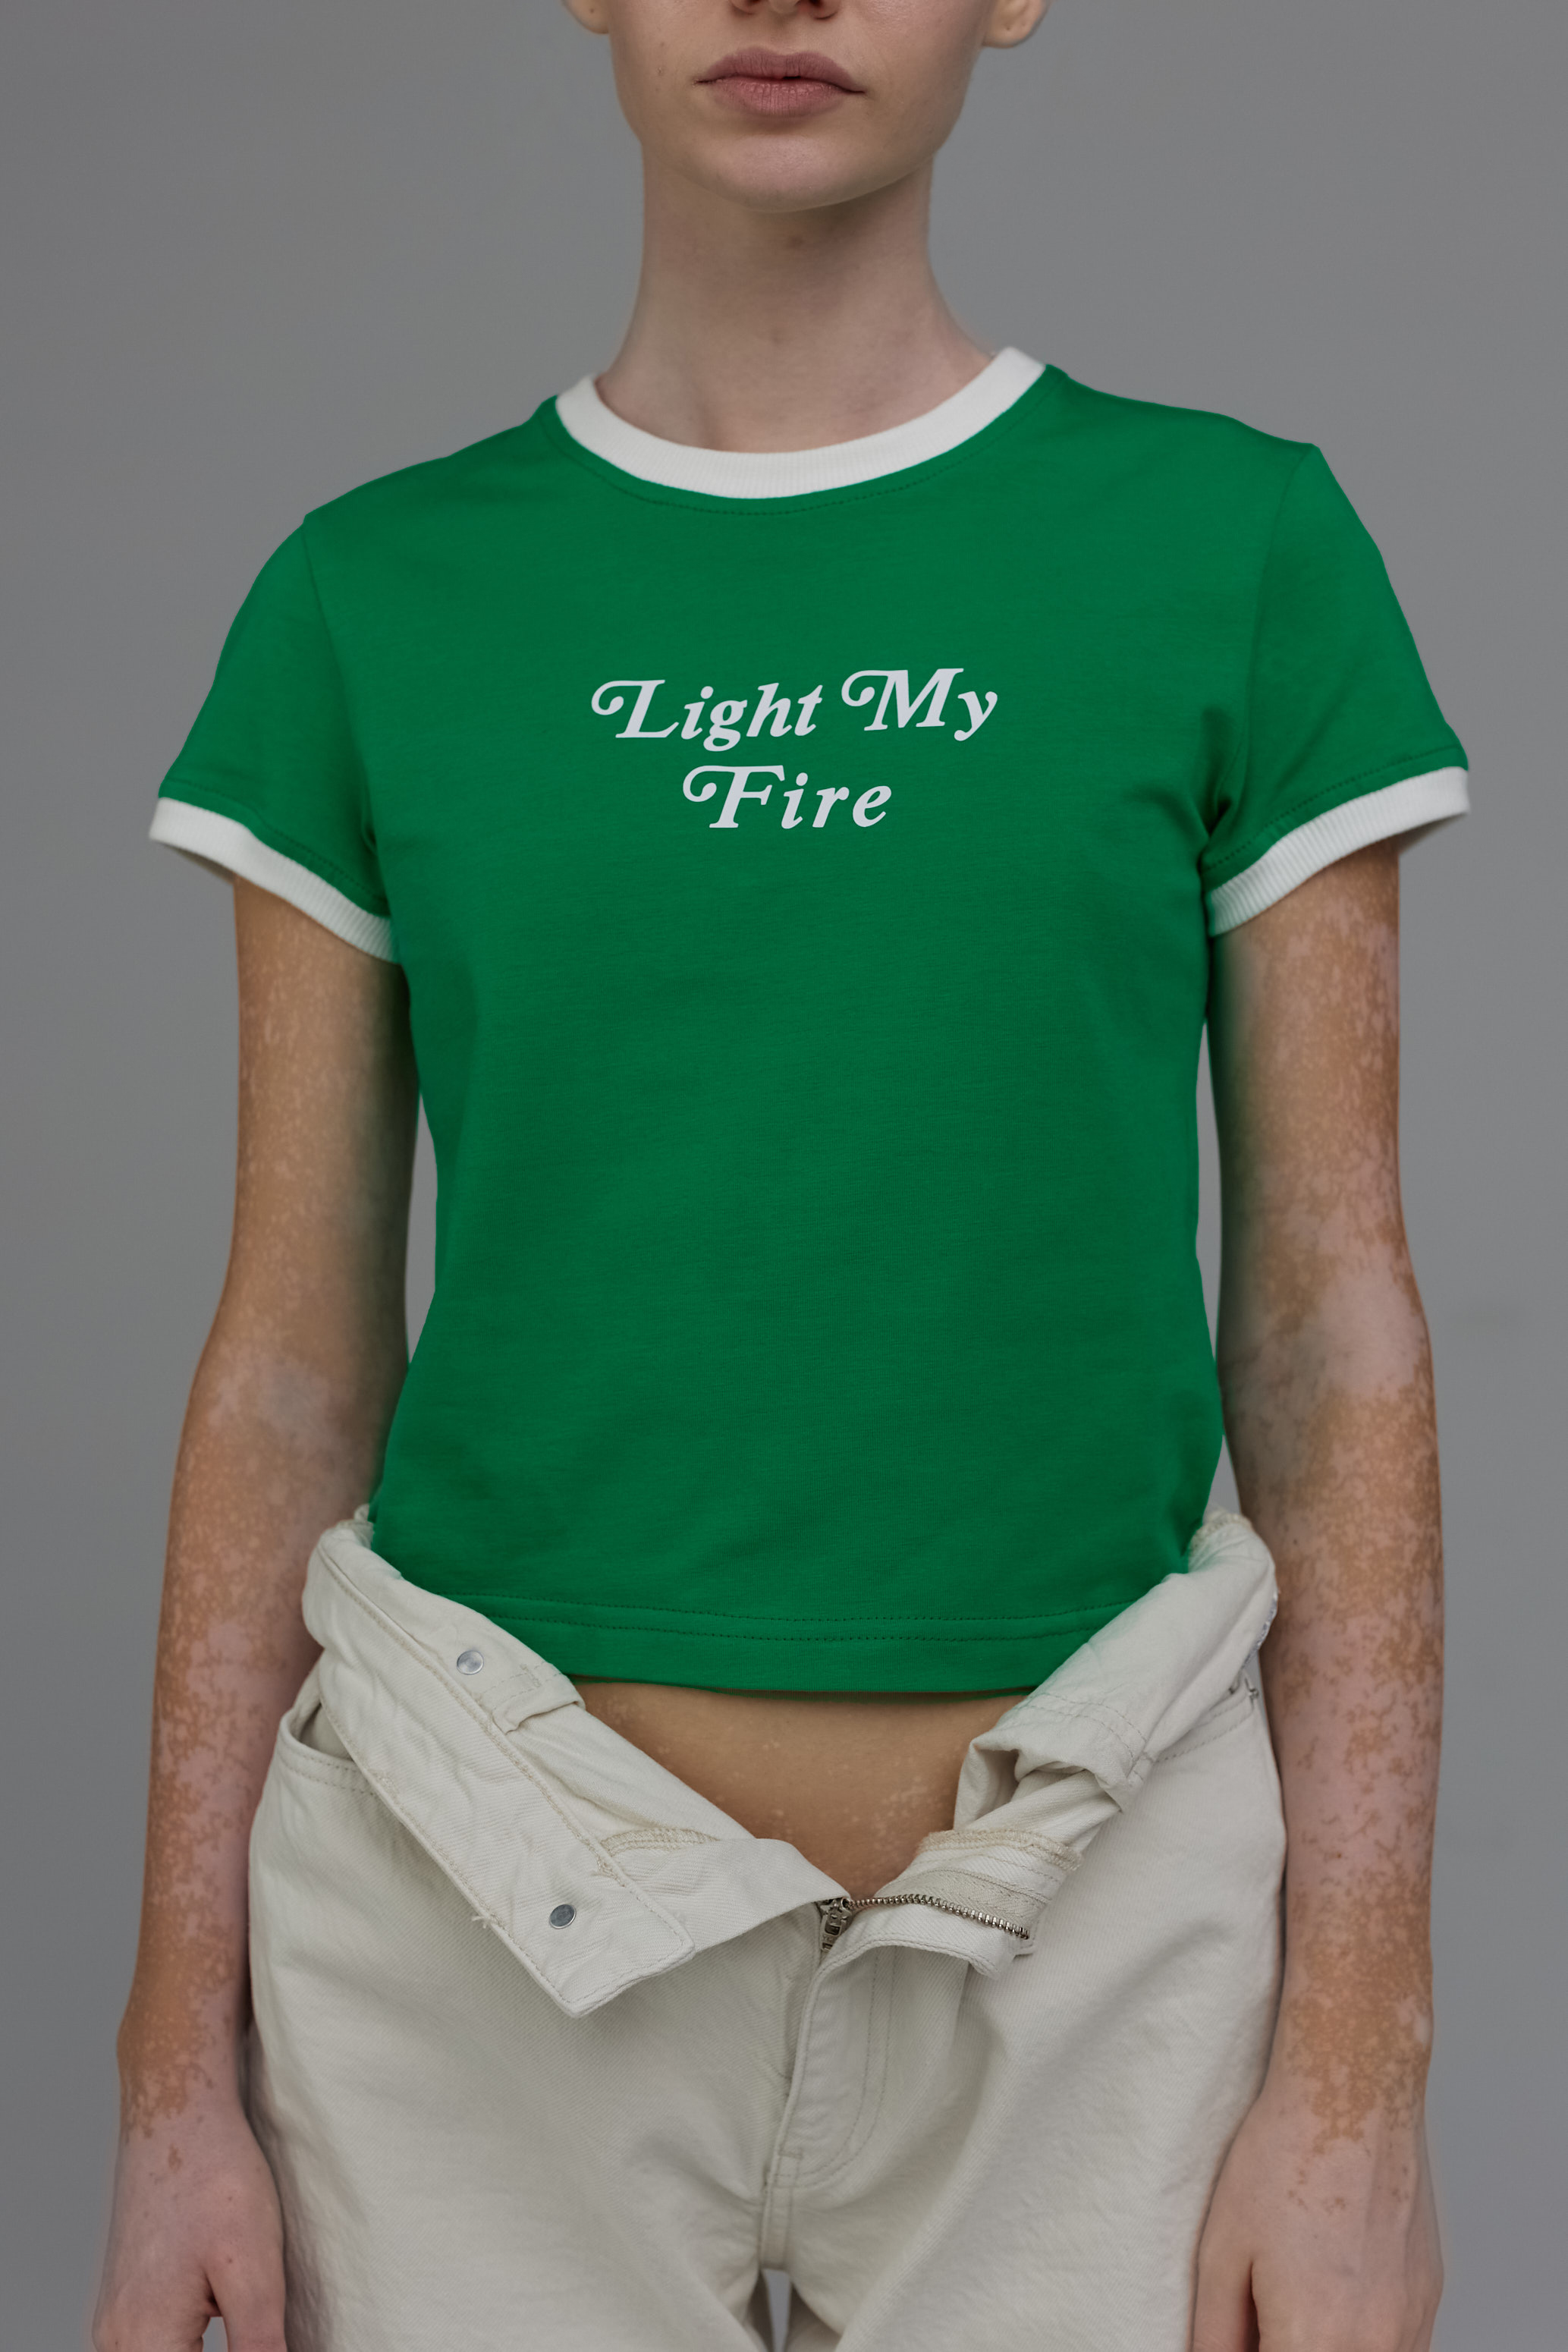 t-shirt light my fire in green color